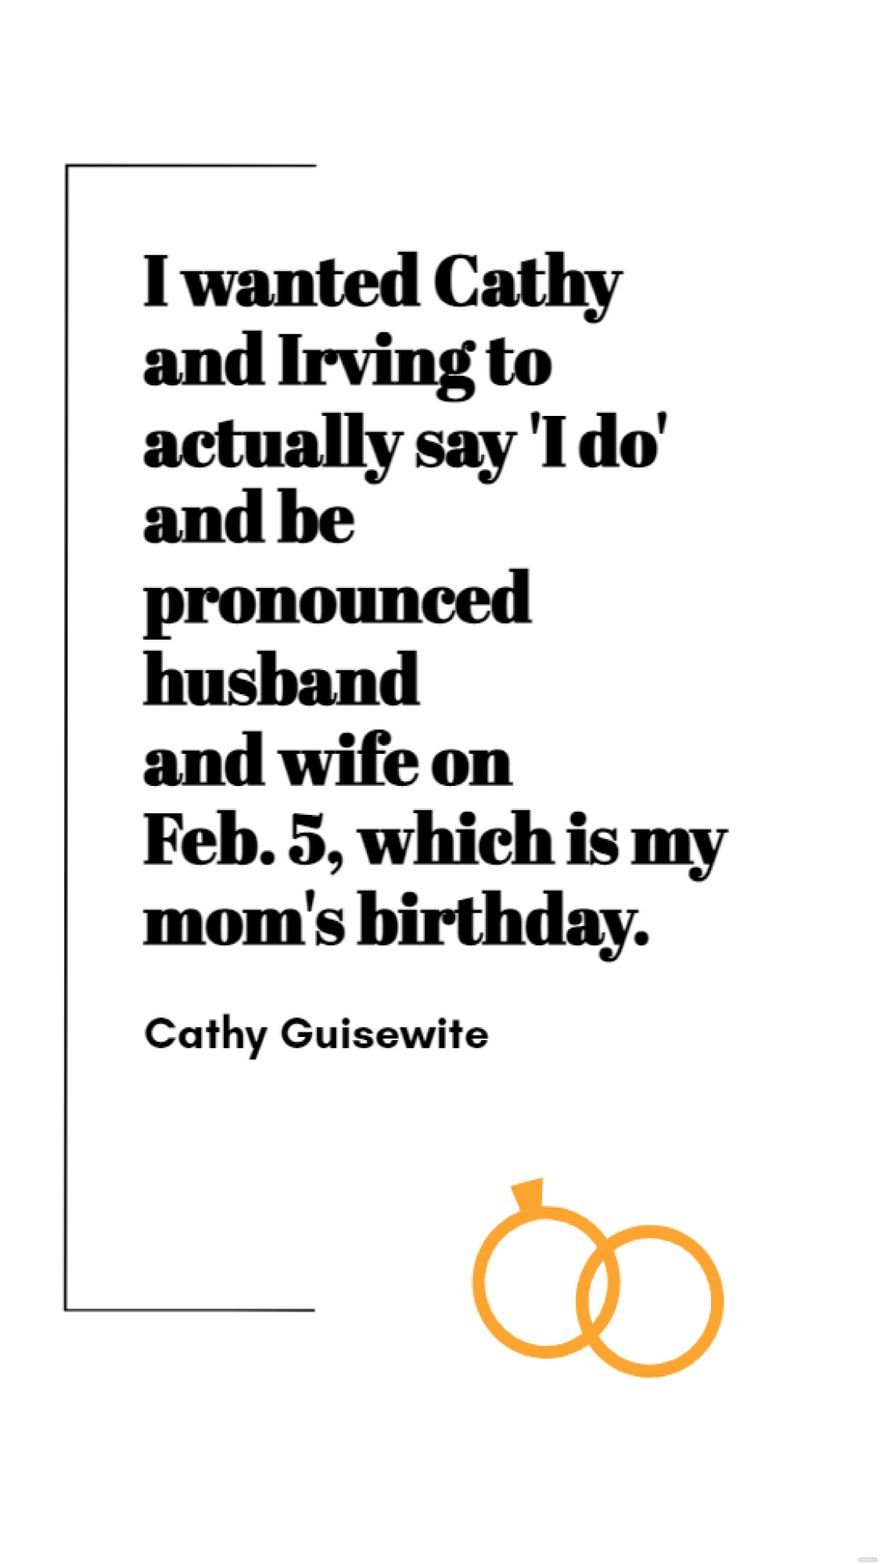 Cathy Guisewite - I wanted Cathy and Irving to actually say 'I do' and be pronounced husband and wife on Feb. 5, which is my mom's birthday.